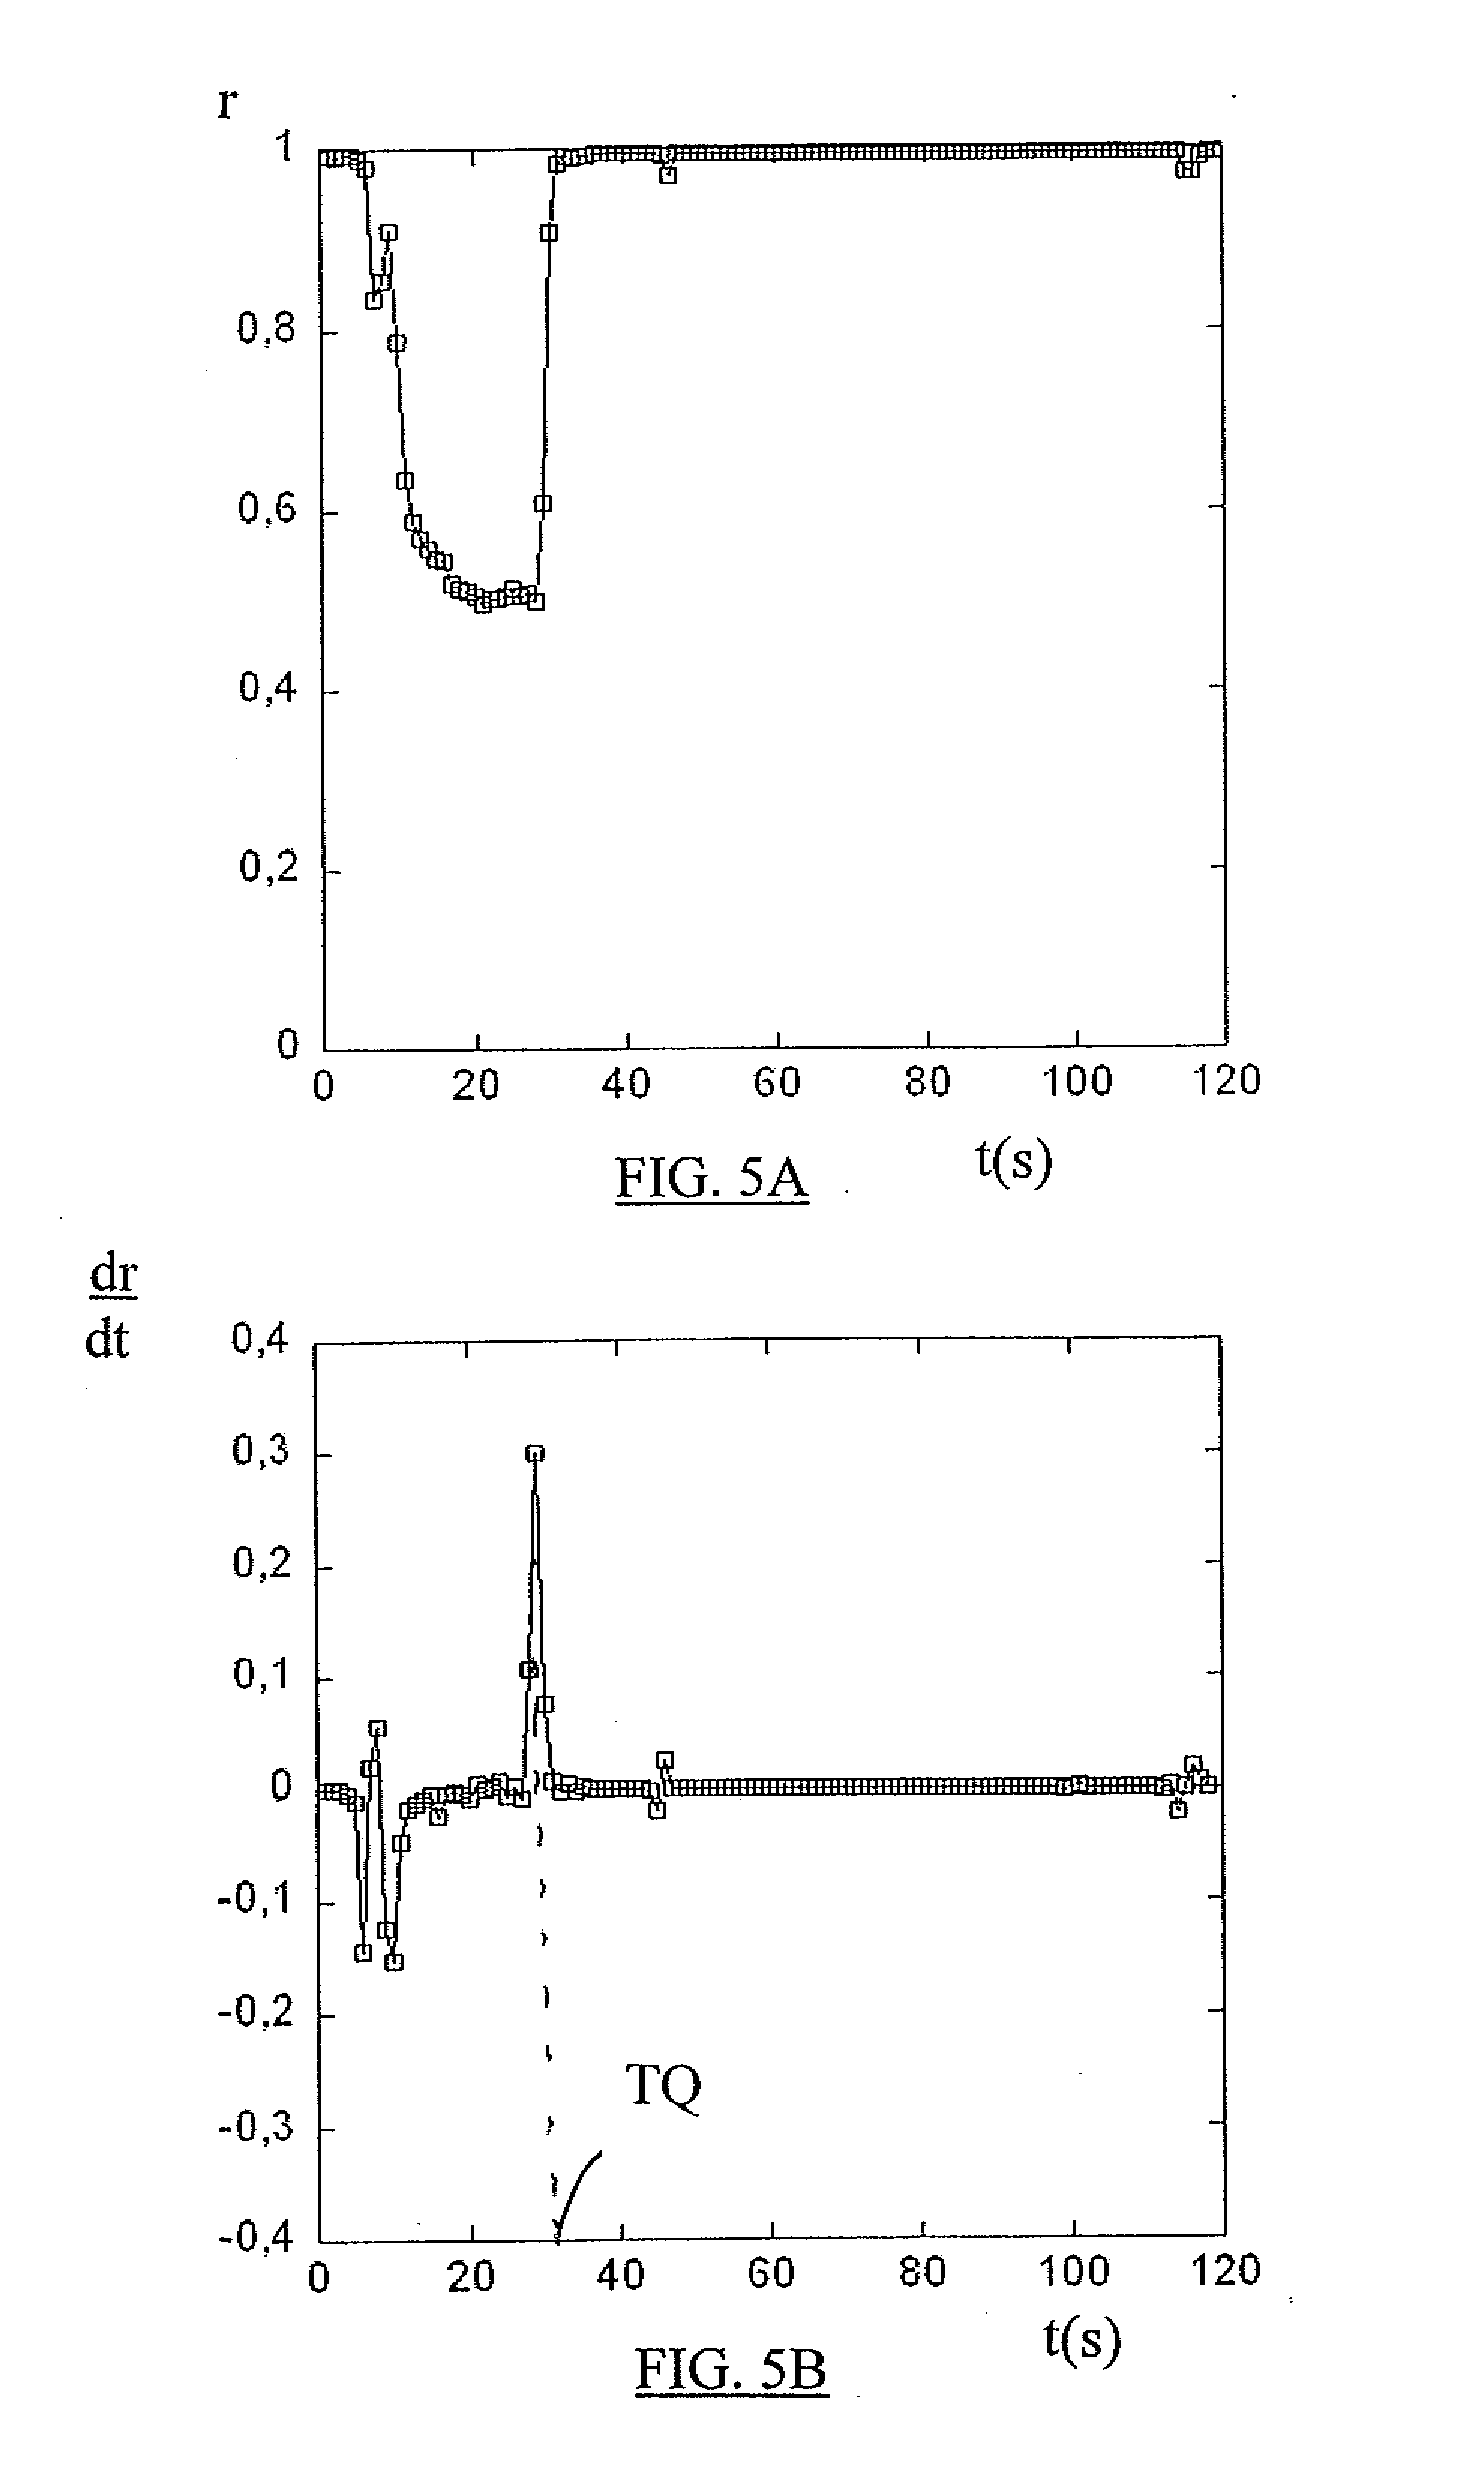 Method and a device for characterizing the coagulation or sedimentation dynamics of a fluid such as blood or blood plasma